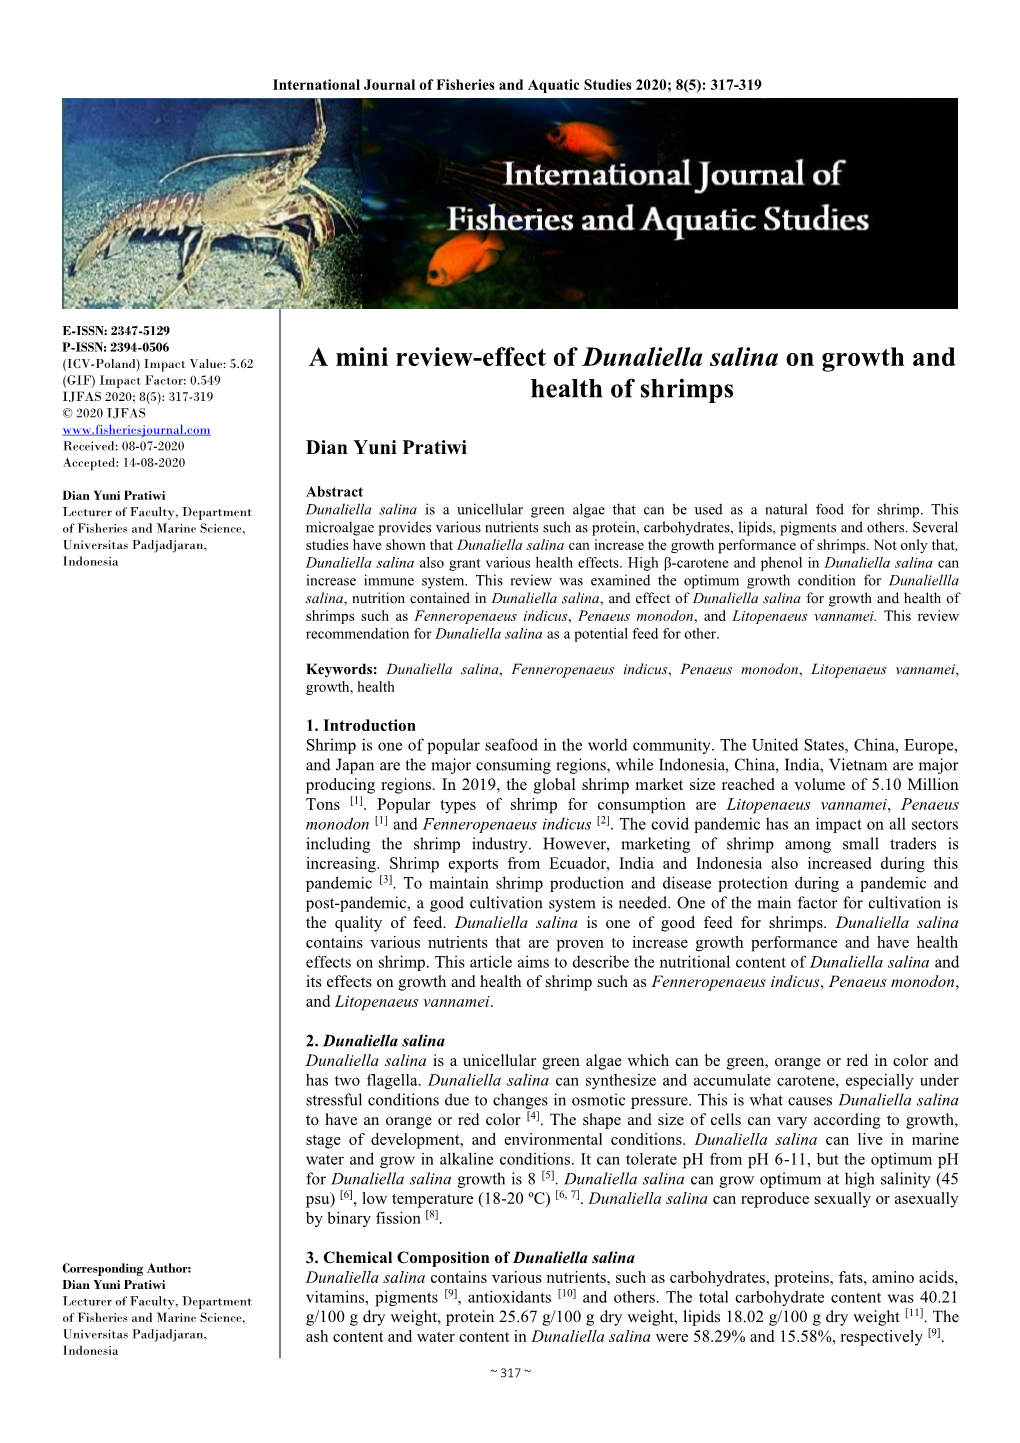 A Mini Review-Effect of Dunaliella Salina on Growth and Health of Shrimps